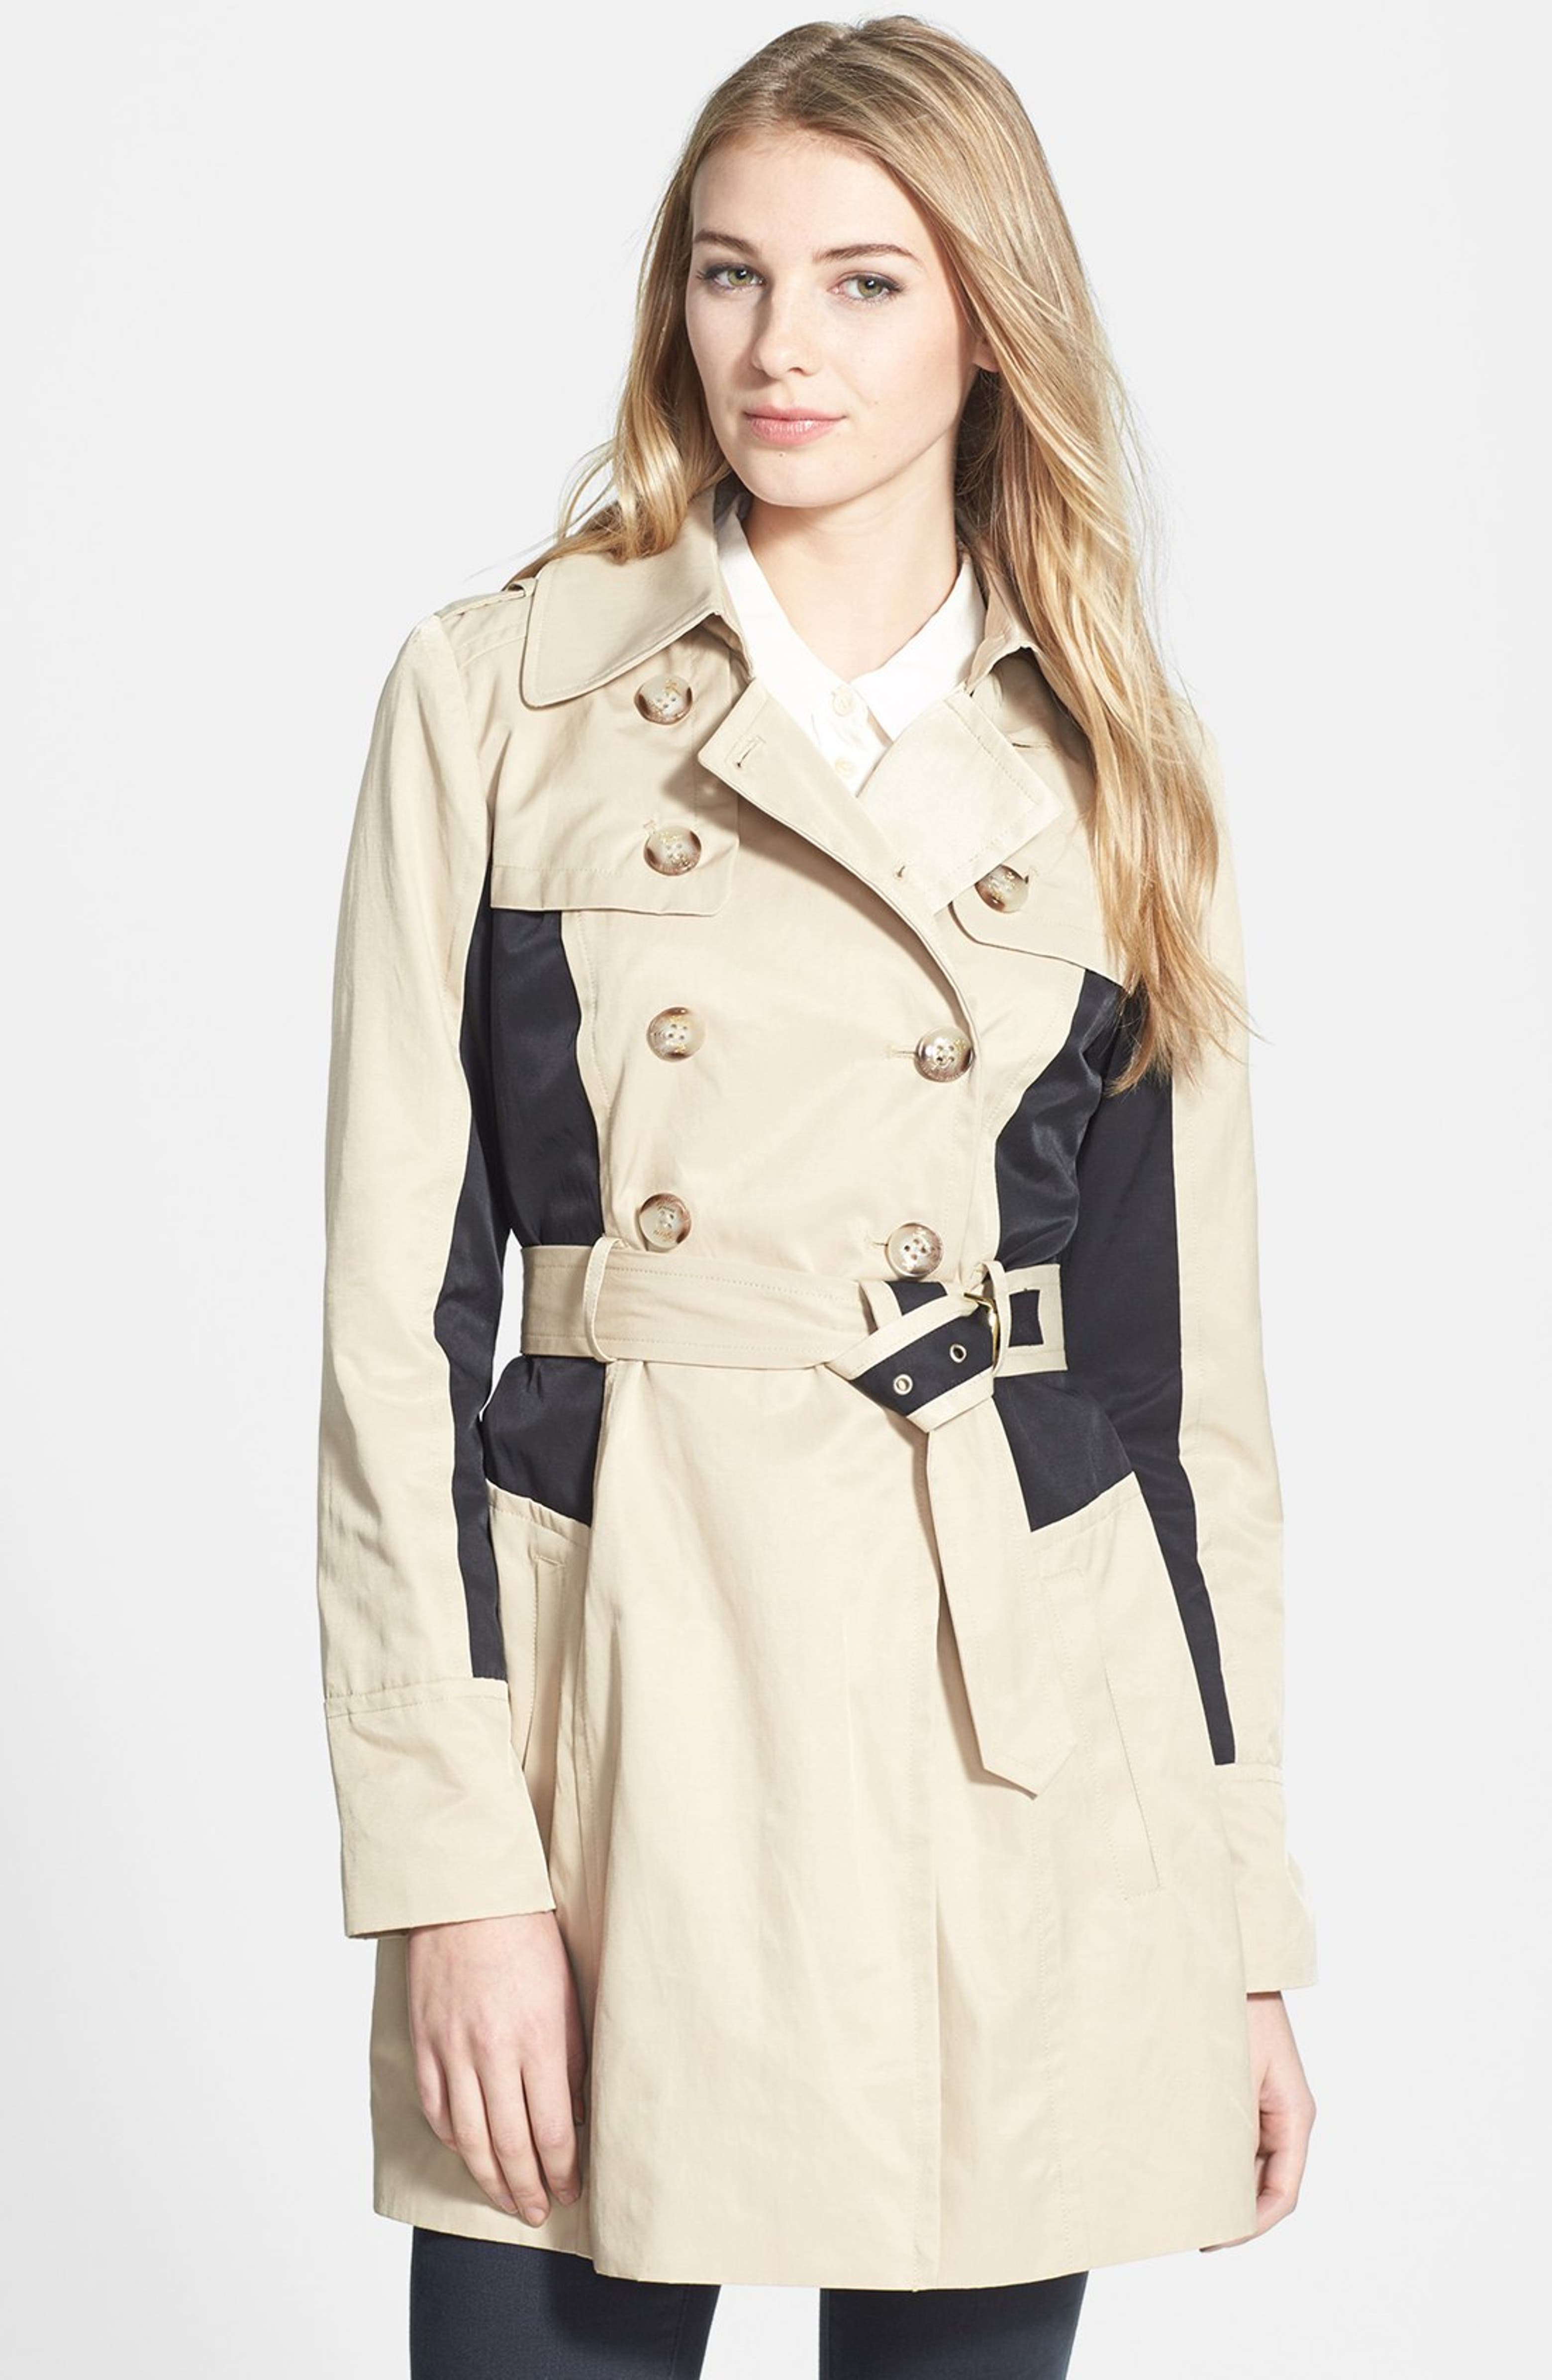 GUESS Colorblock Double Breasted Trench Coat | Nordstrom